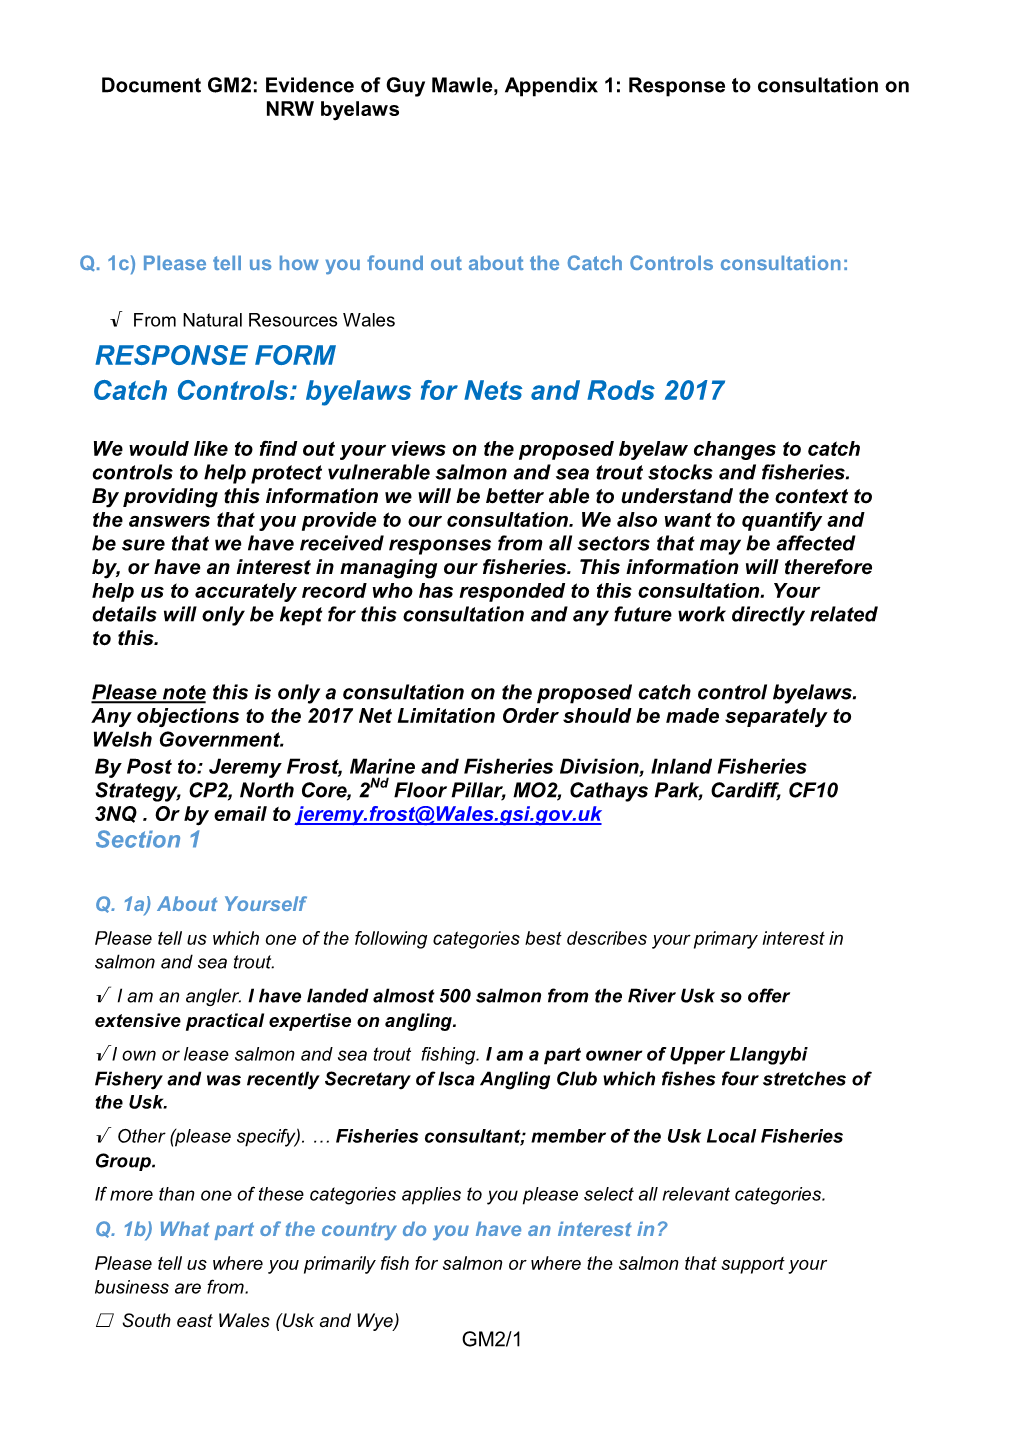 RESPONSE FORM Catch Controls: Byelaws for Nets and Rods 2017